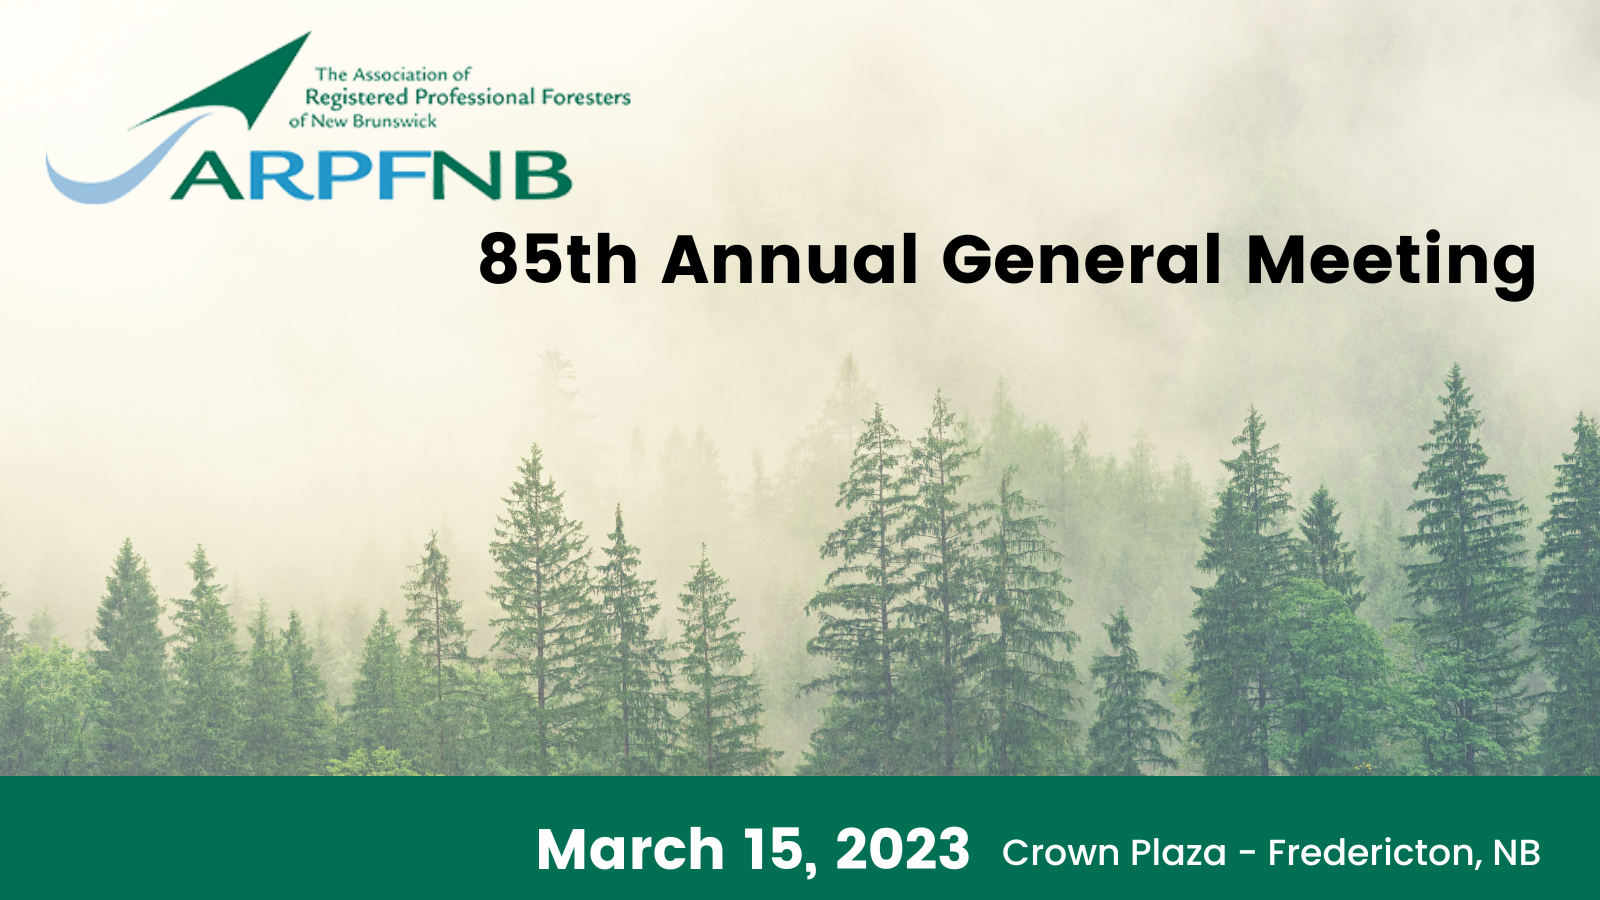 The association of registered professional foresters of New Brunswick